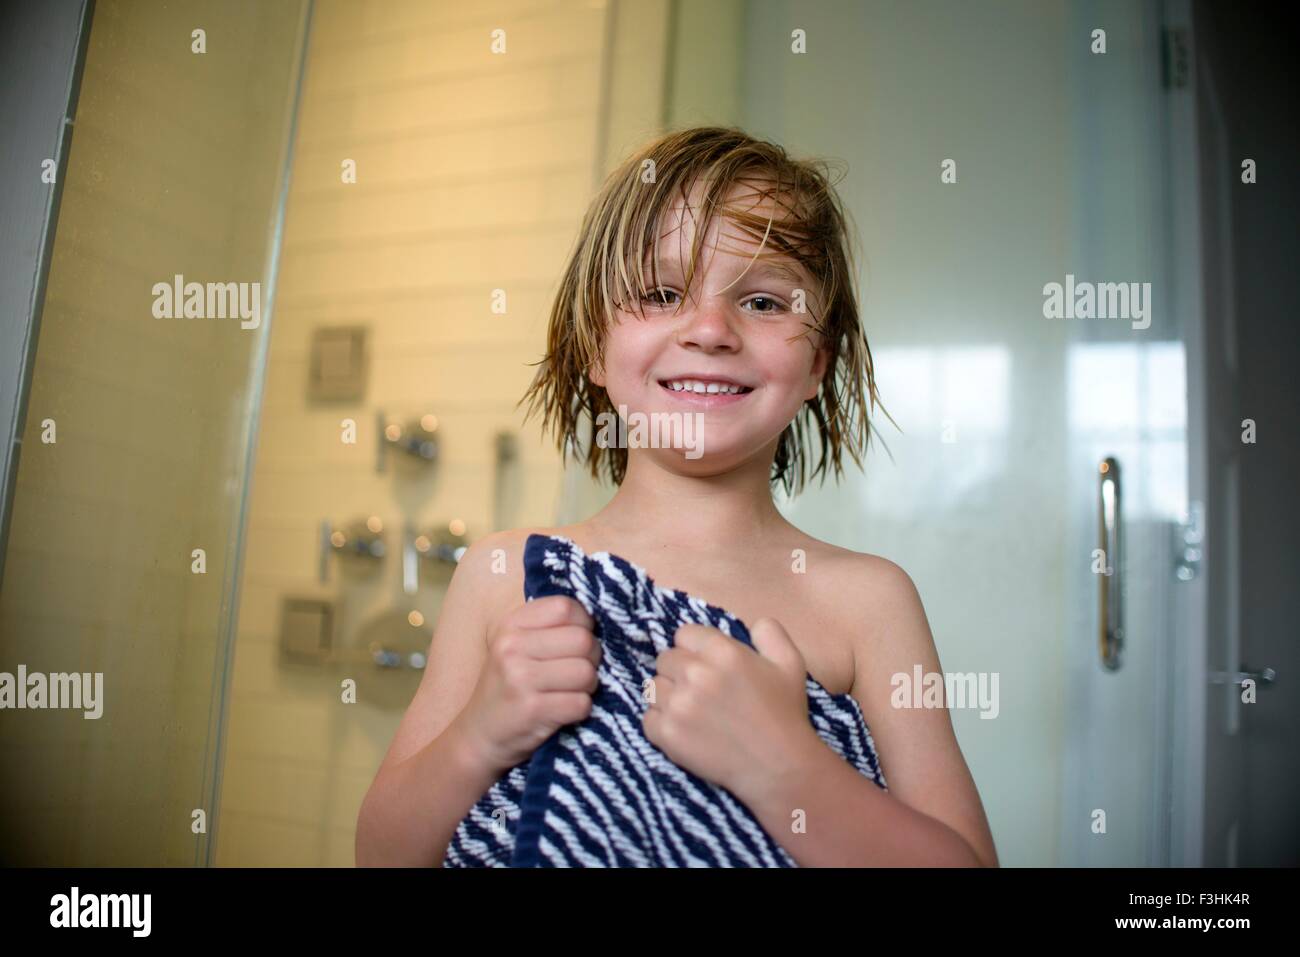 Boy after shower Stock Photo